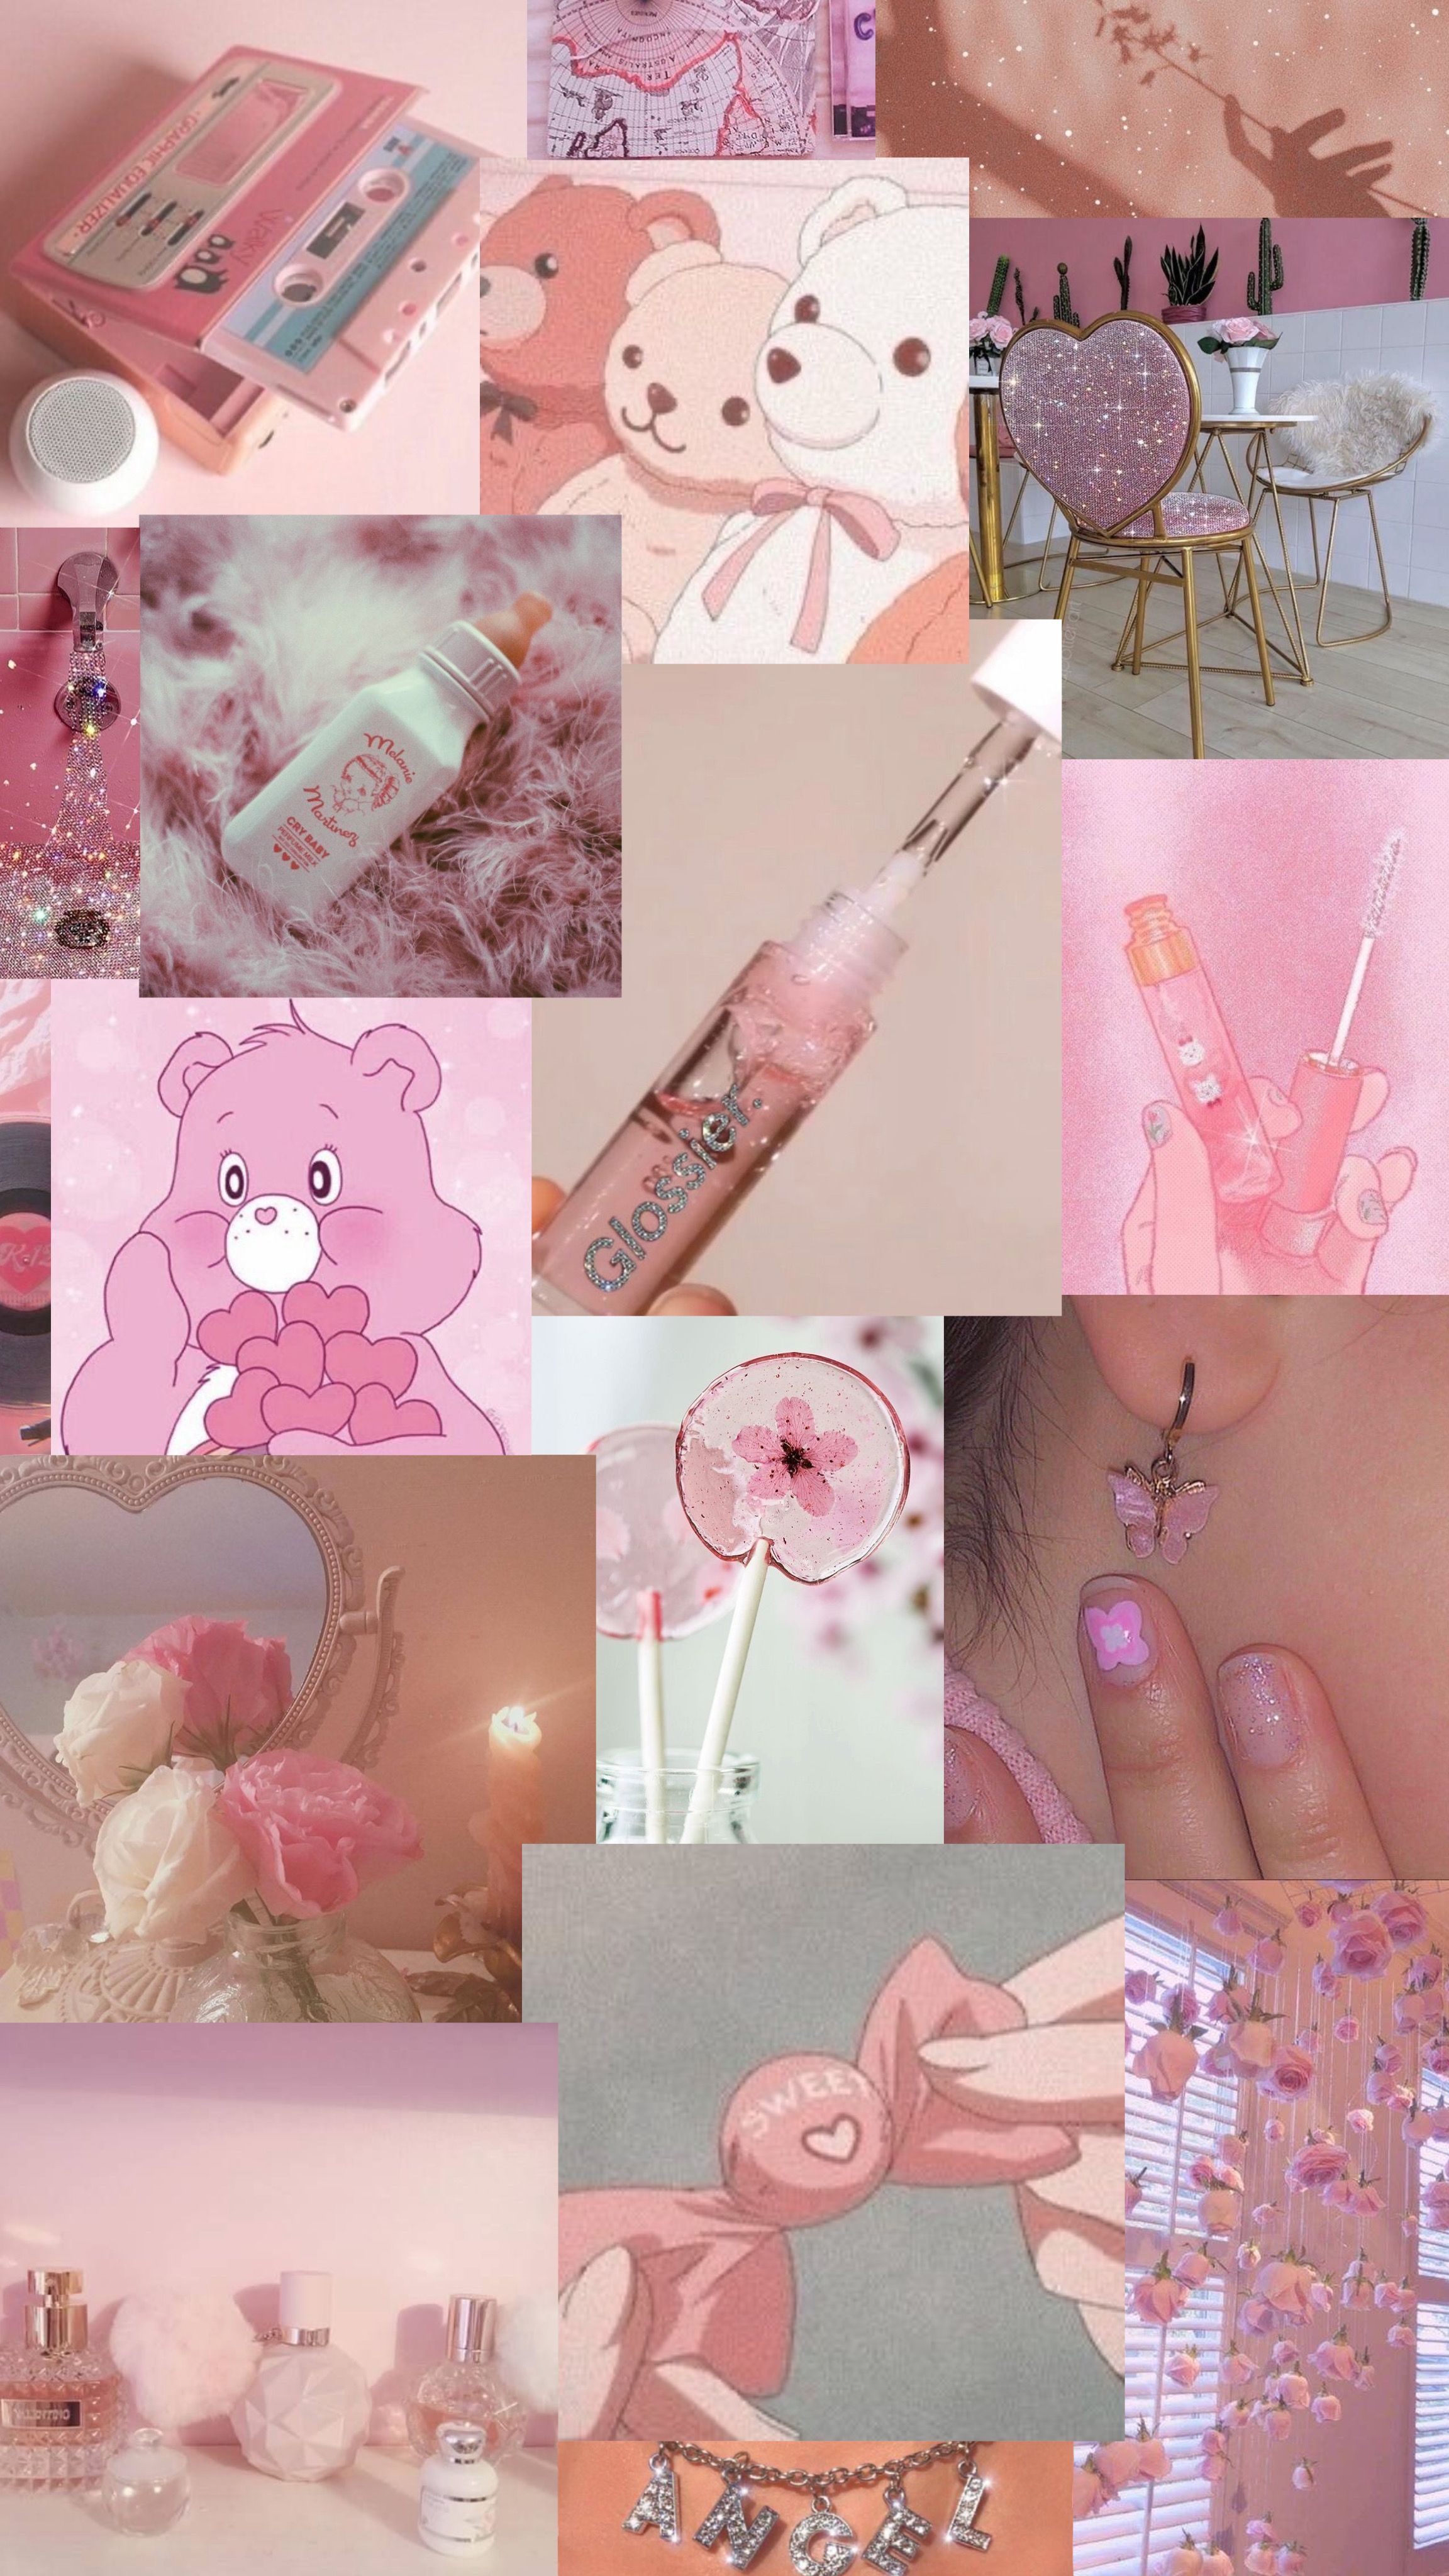 pink collage wallpaper. Pink wallpaper, Aesthetic themes, Wallpaper